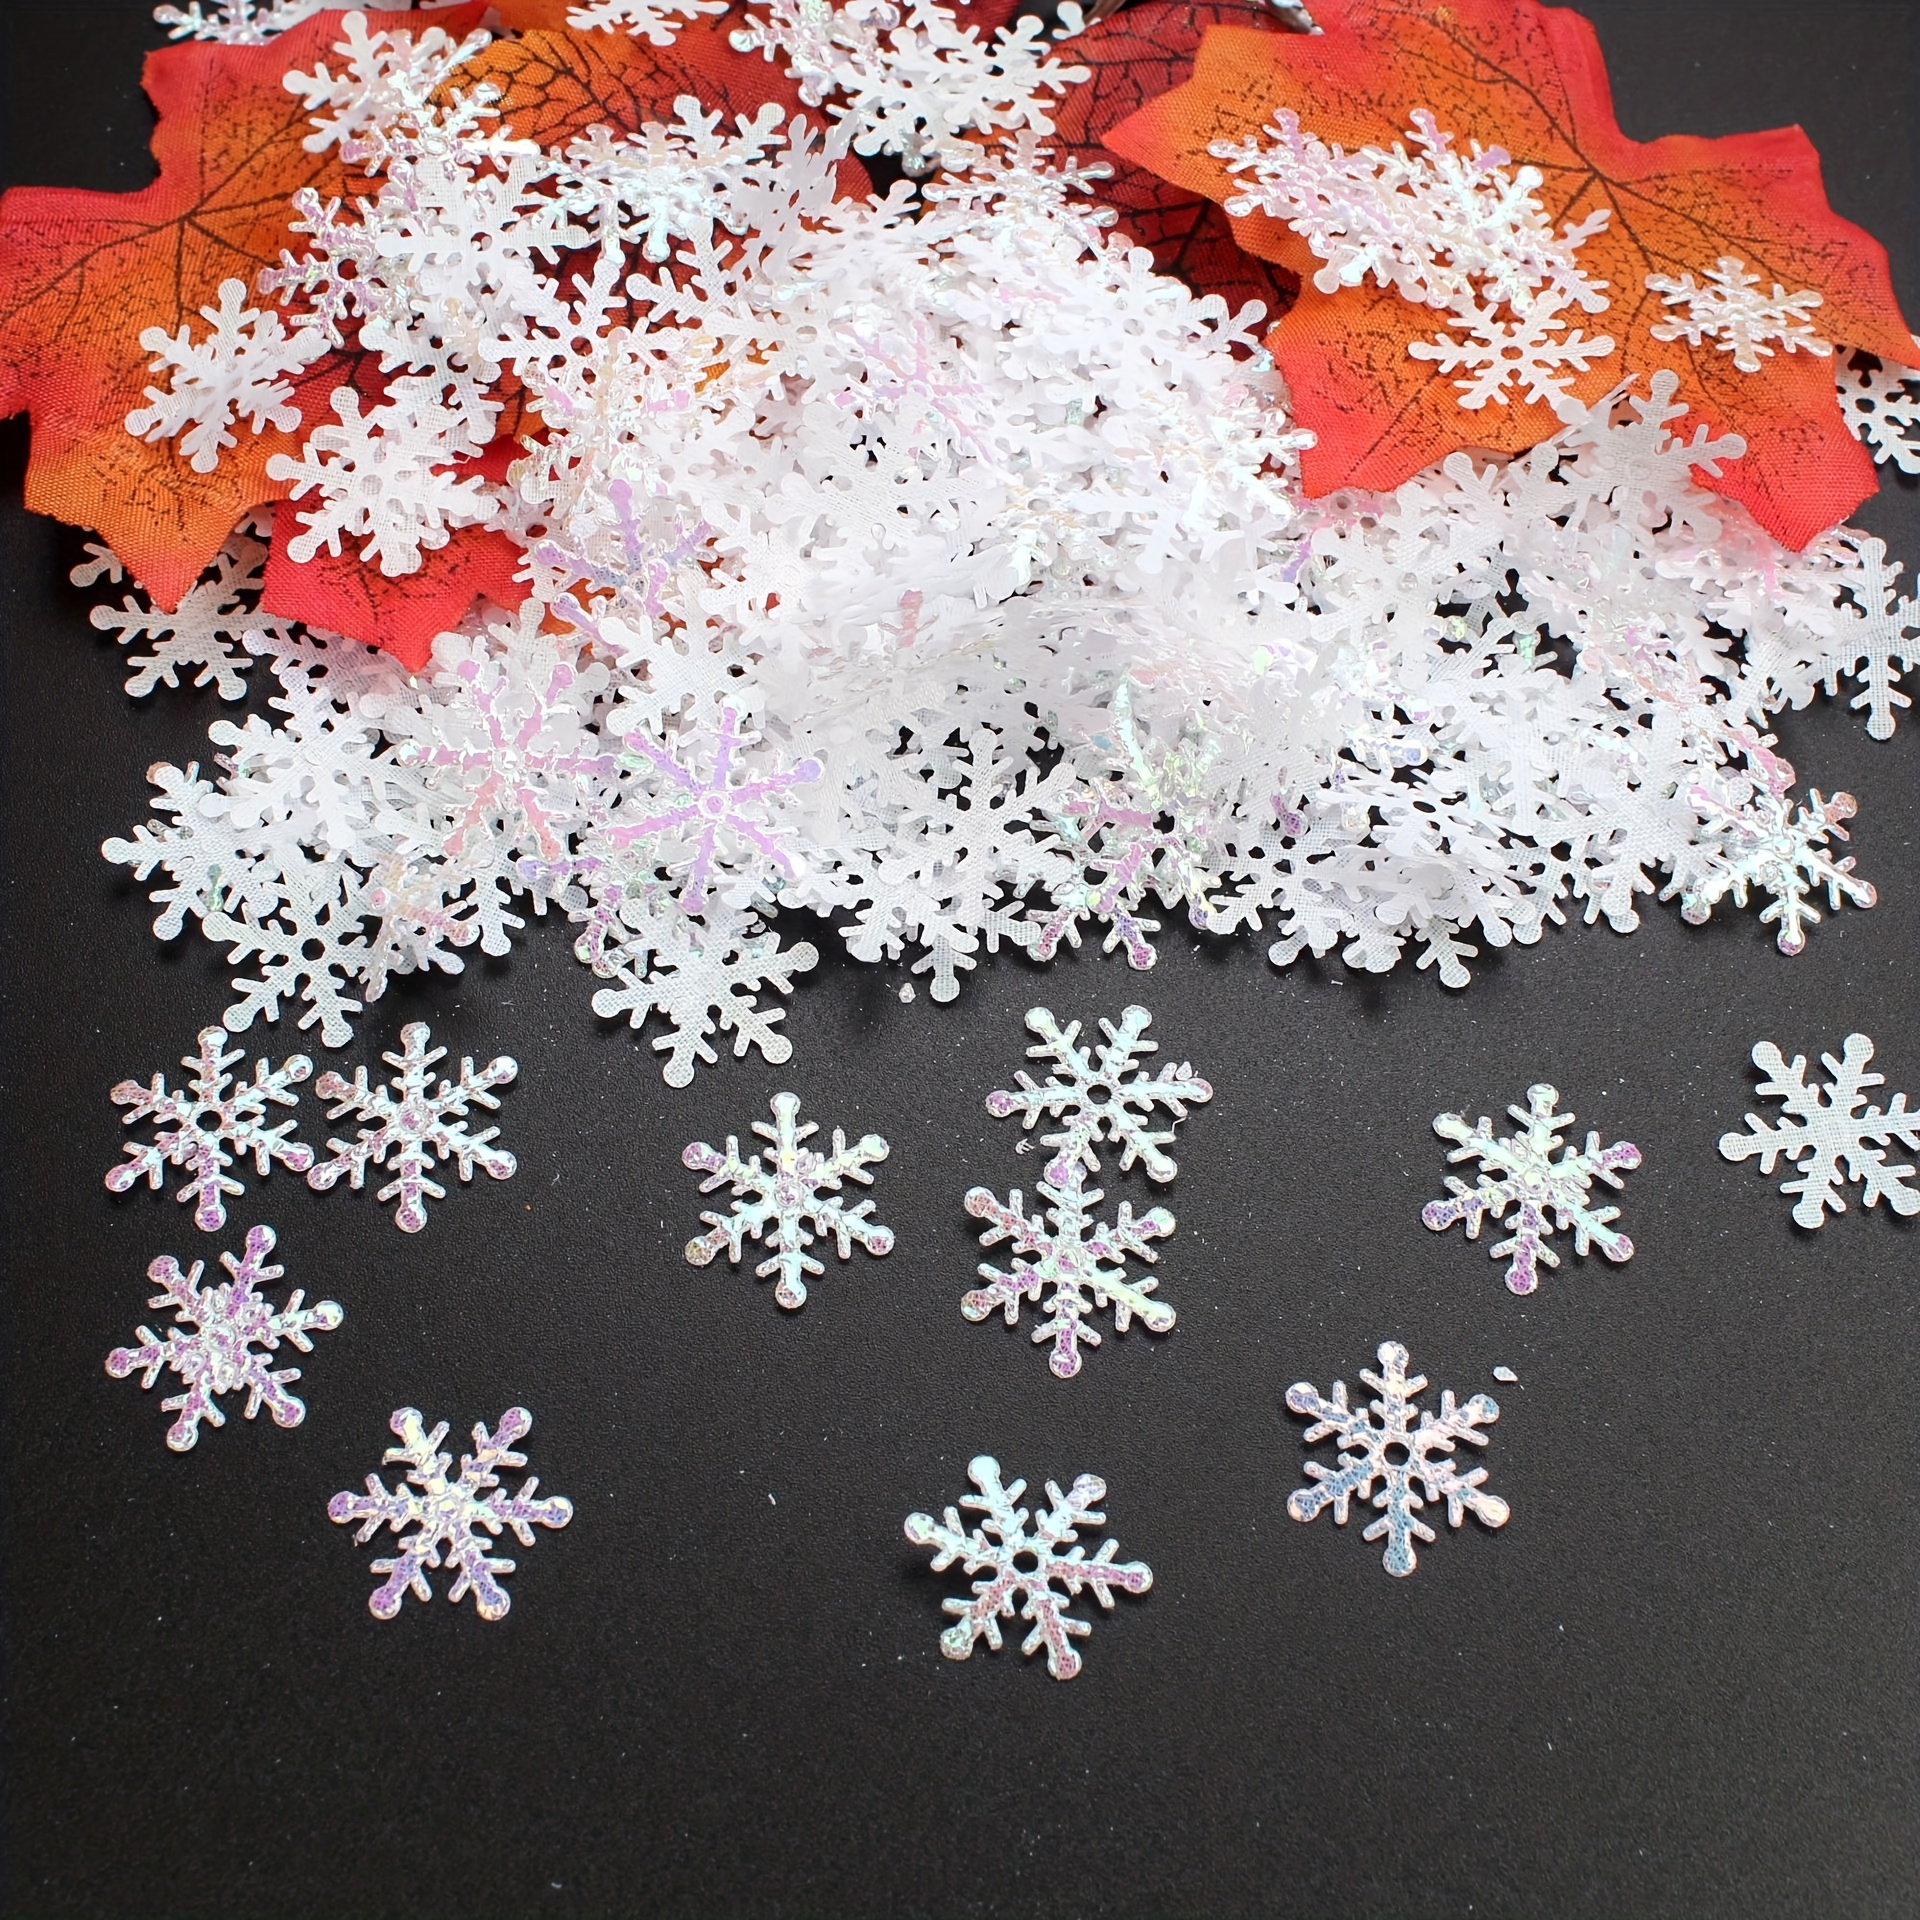 wexpw 400 Pieces Christmas Snowflake Confetti 3 Shapes Christmas